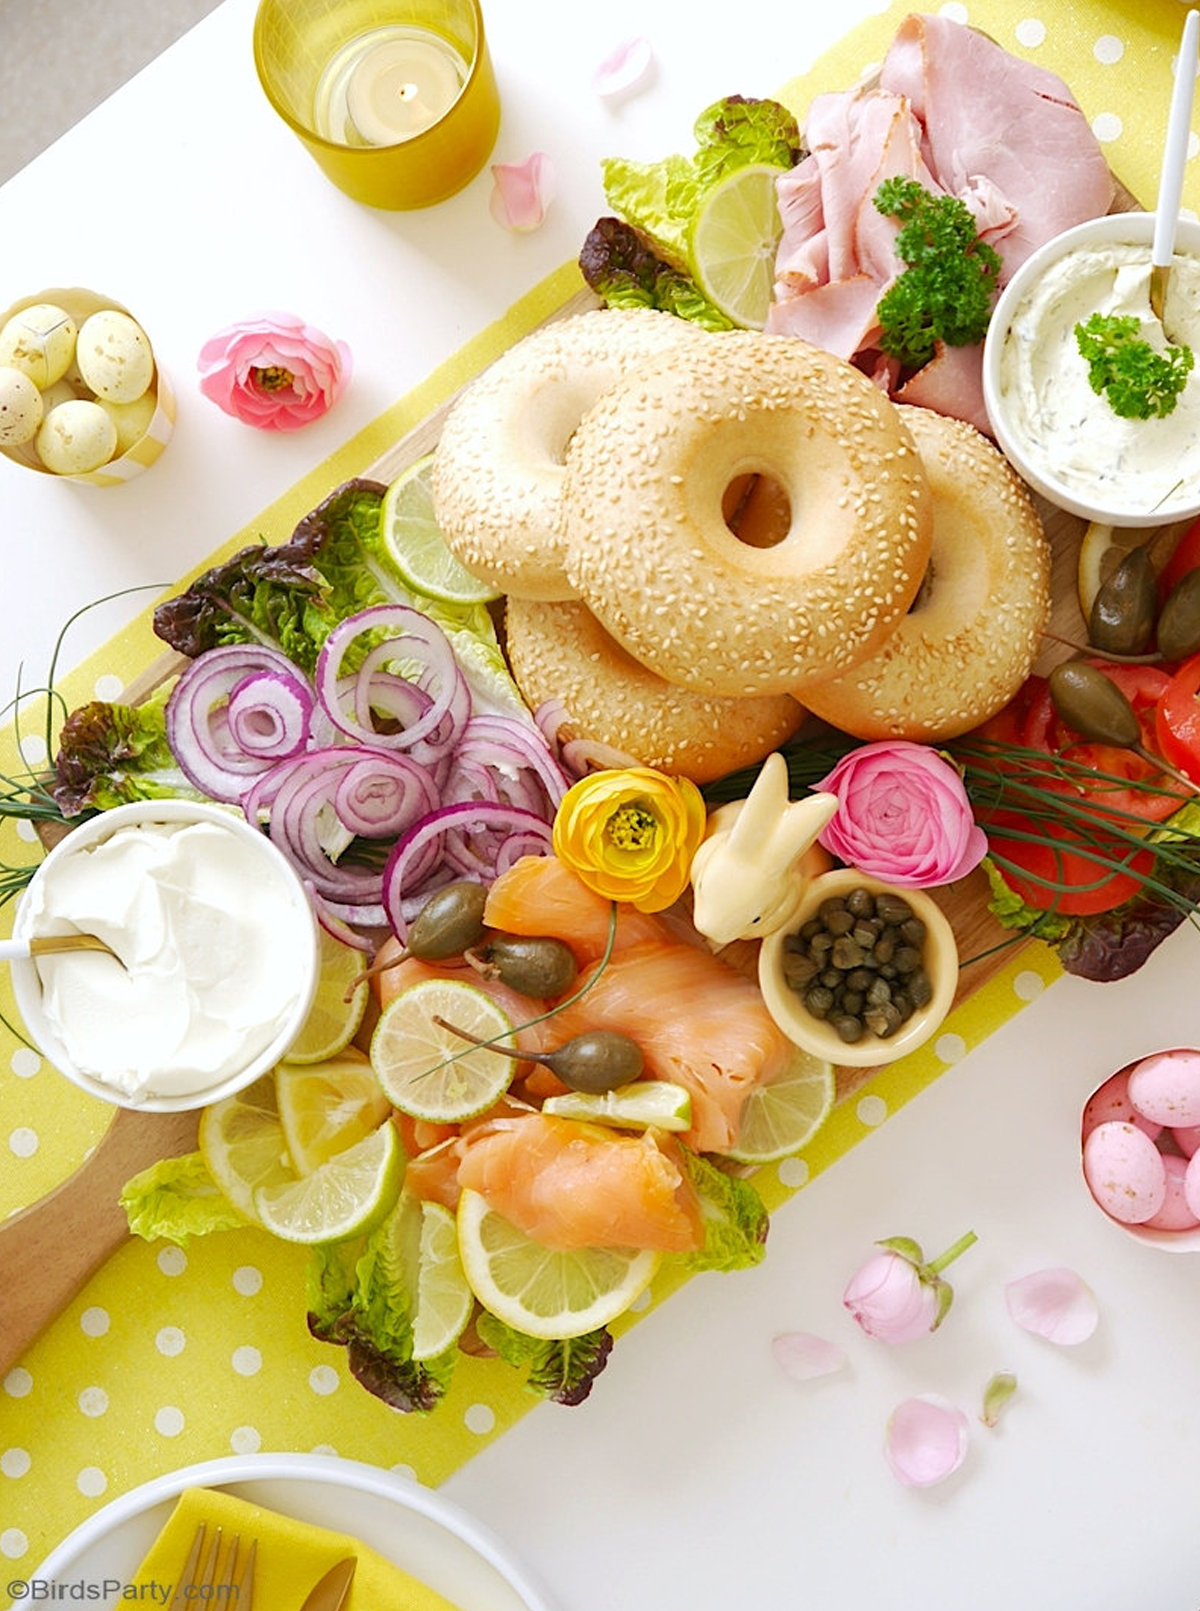 birds party spring bagel board with salmon, capers, veggies, and more.